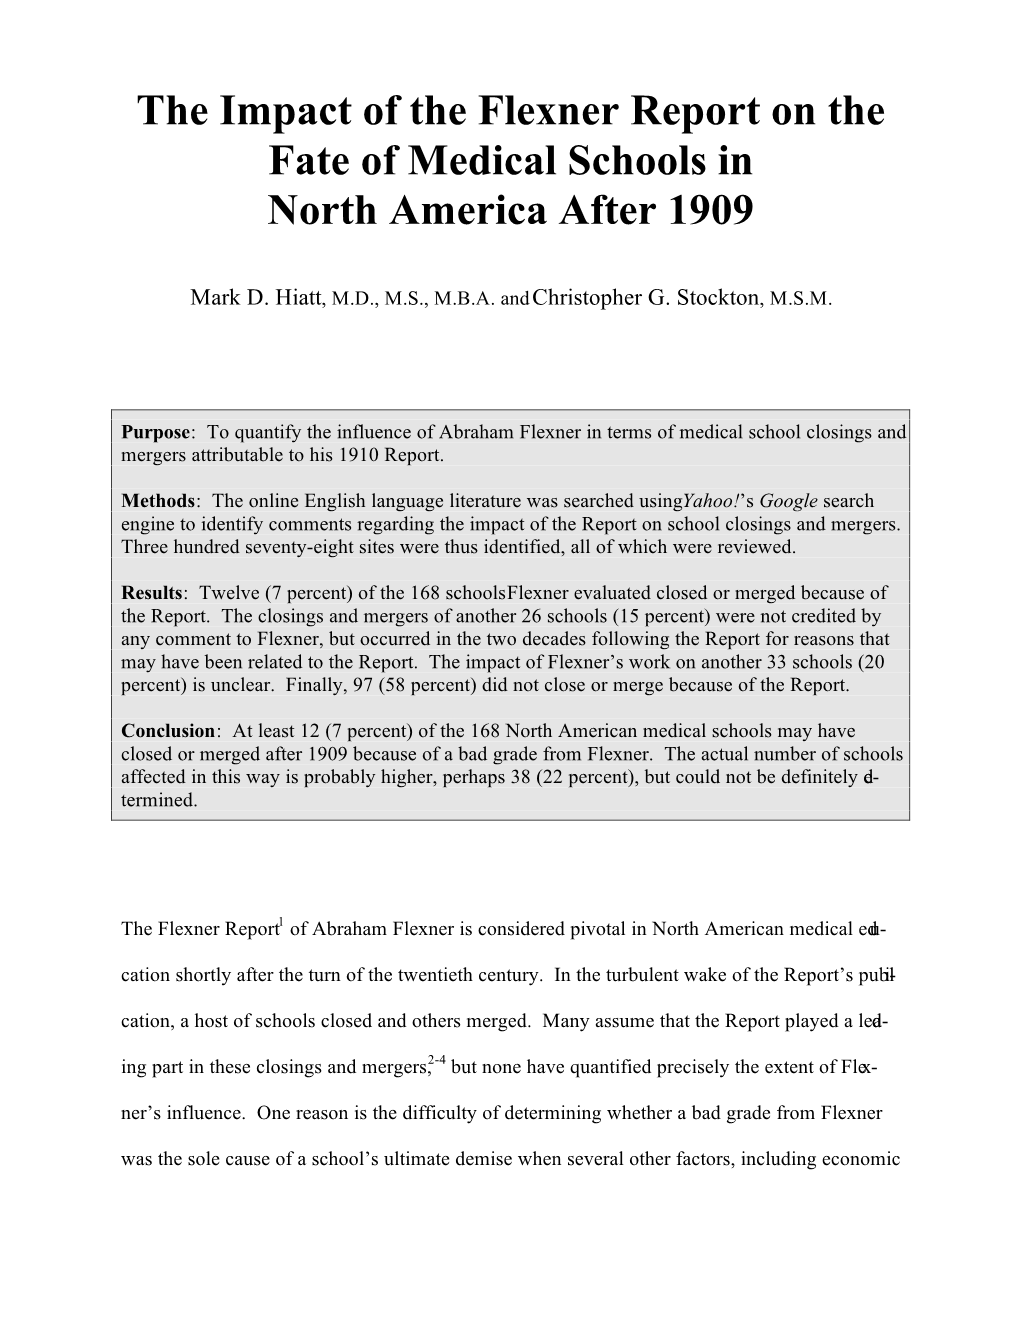 The Impact of the Flexner Report on the Fate of Medical Schools in North America After 1909